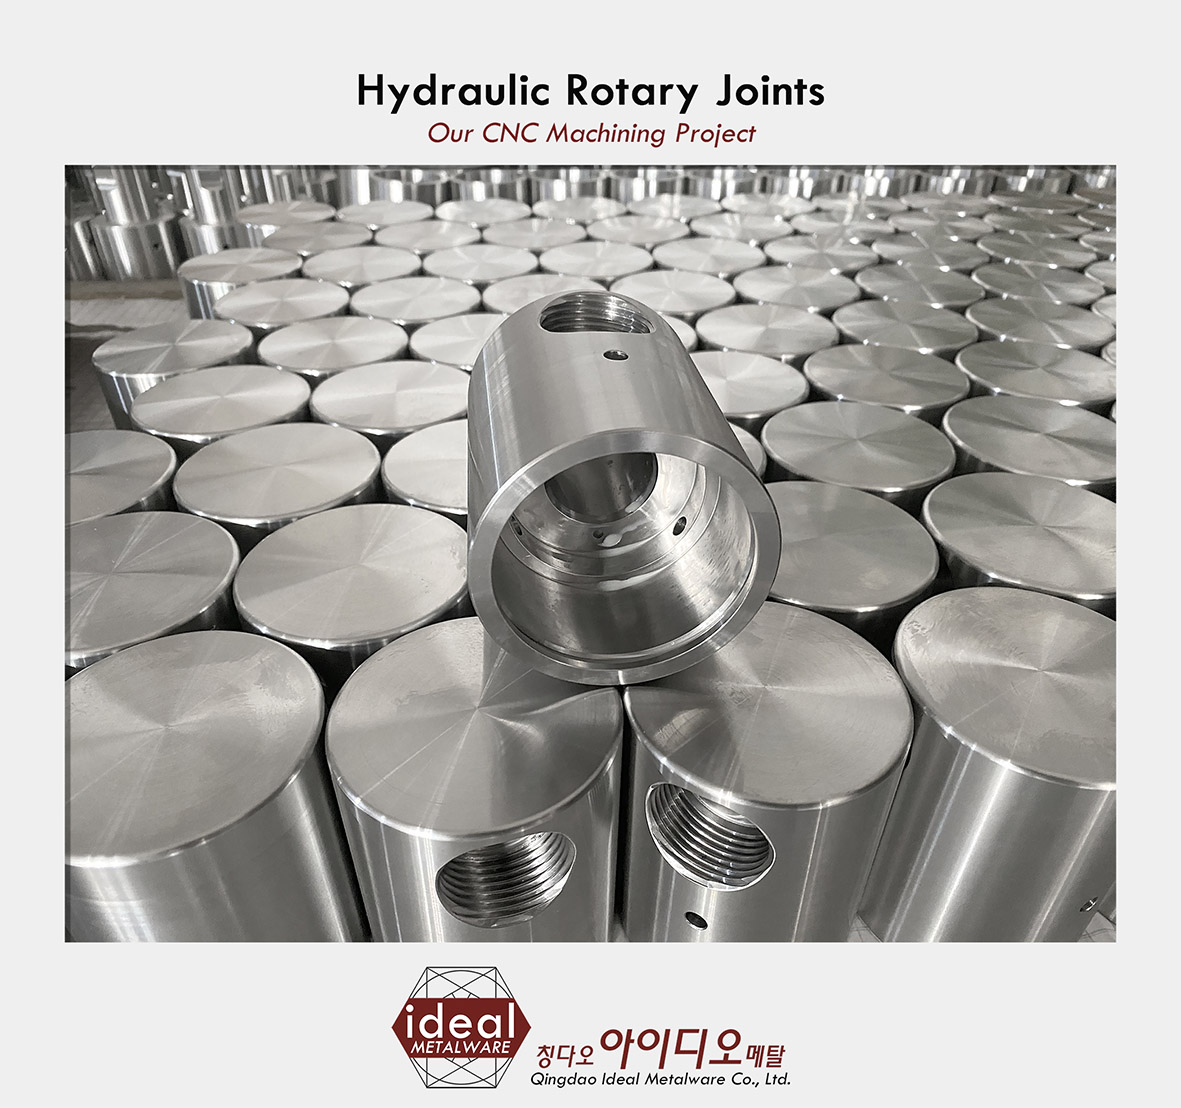 Hydraulic Rotary Joints -2 拷贝 - xiao.jpg